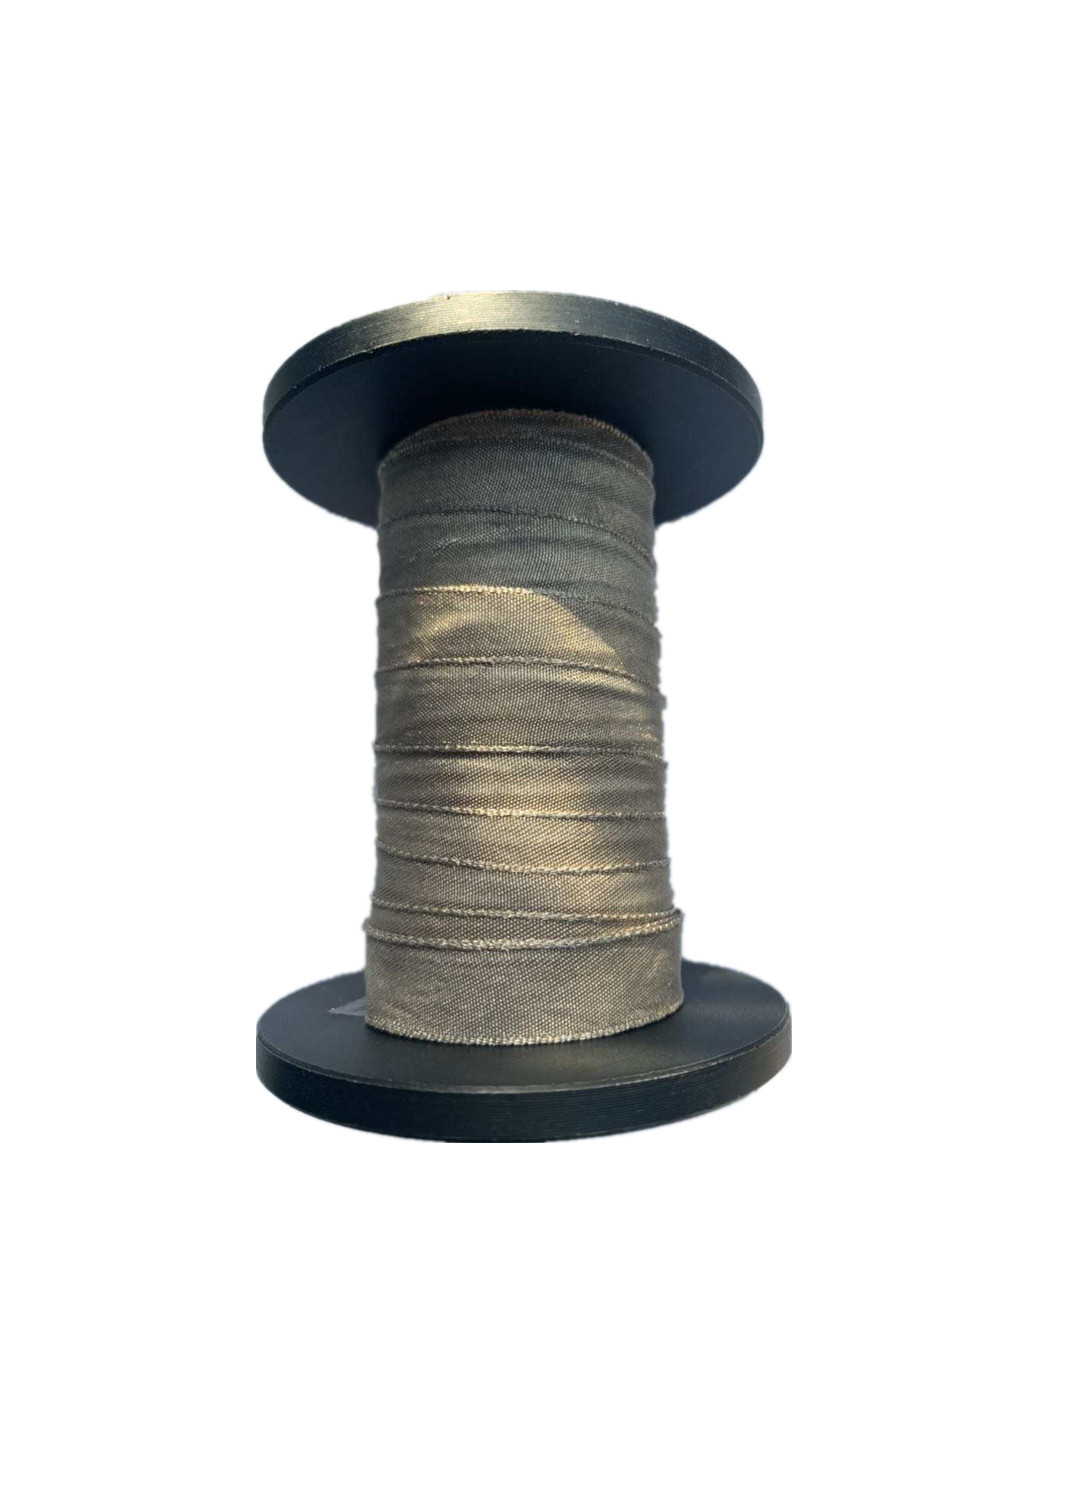 Silver plated conductive tape/silver plated conductive rope